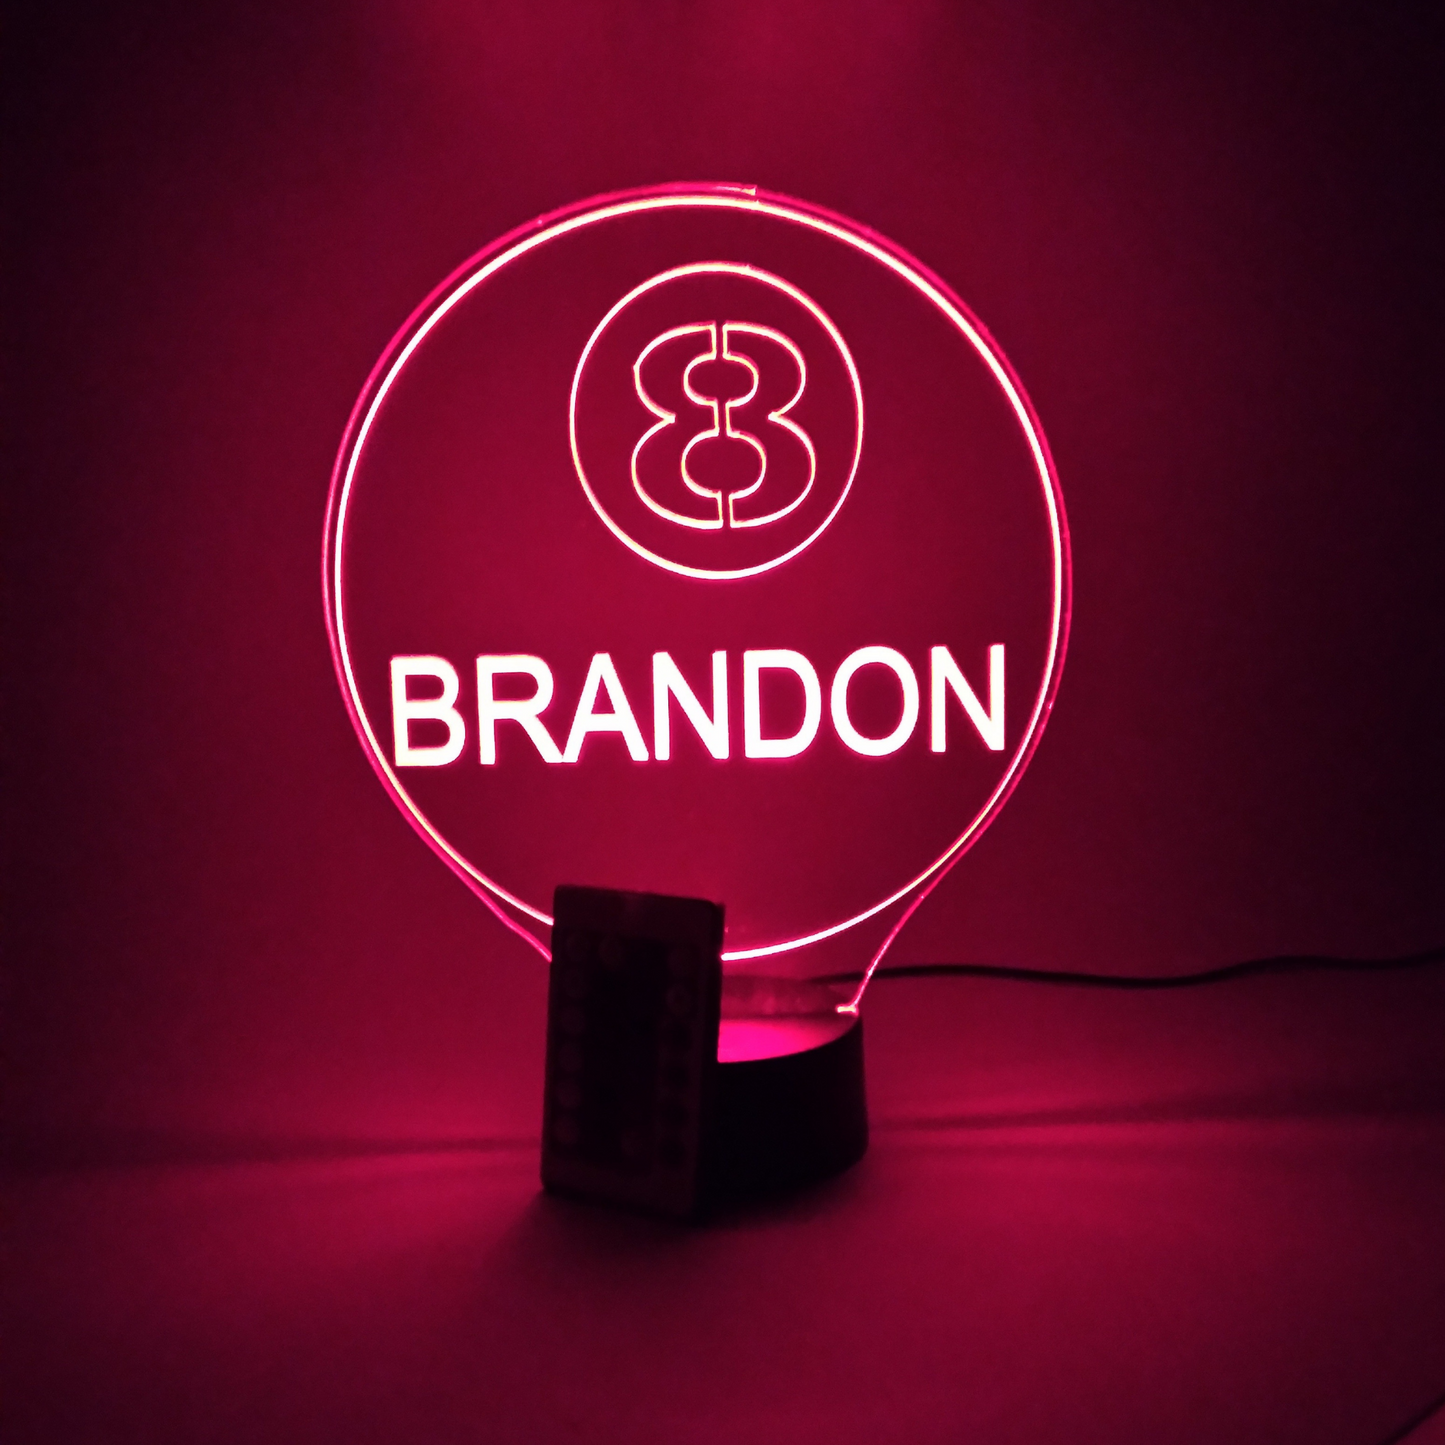 8 Eight Ball Pool Billiards Personalized Night Light Up Table Desk Lamp LED Eight ball Cue Sports Games Name Engraved 16 Colors with Remote